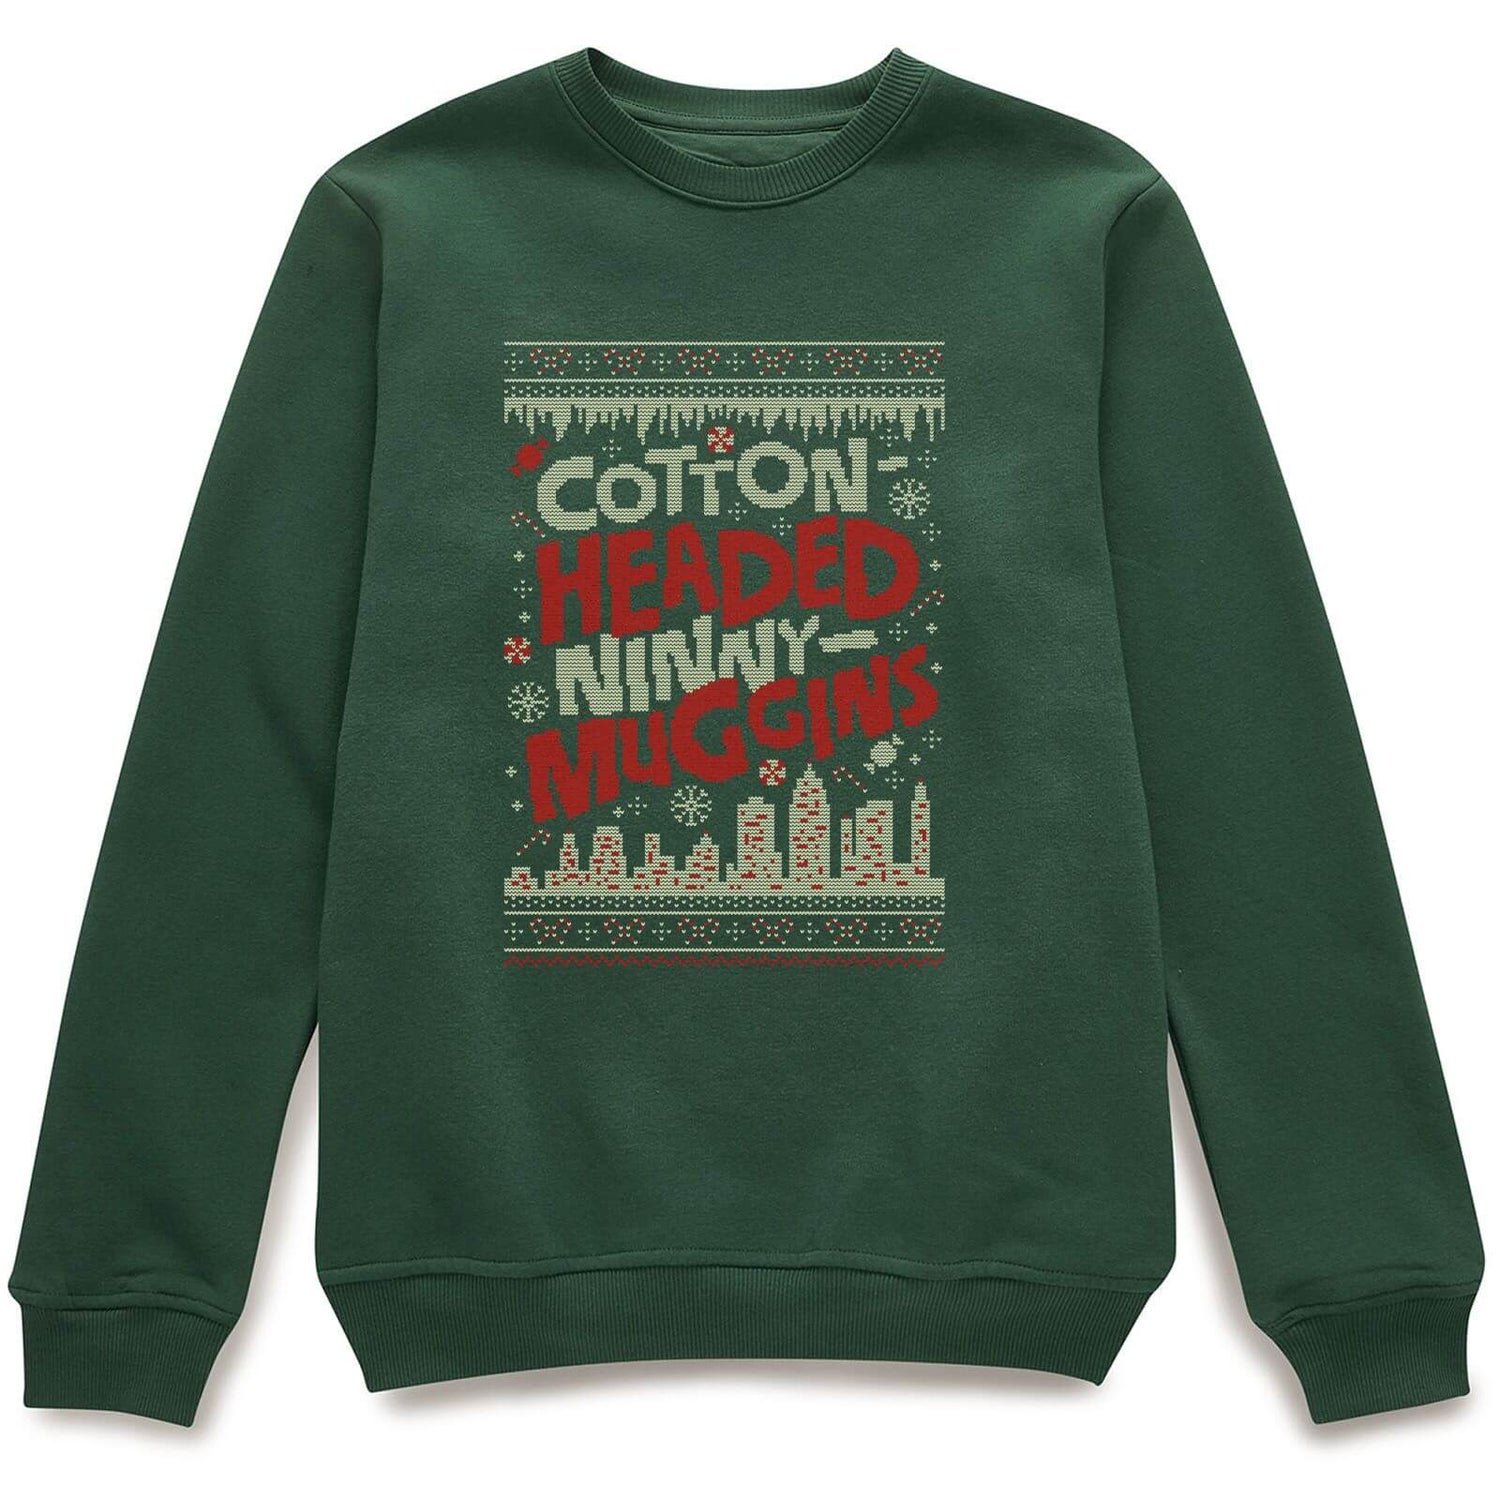 Elf Cotton-Headed-Ninny-Muggins Knit Christmas Sweater - Forest Green